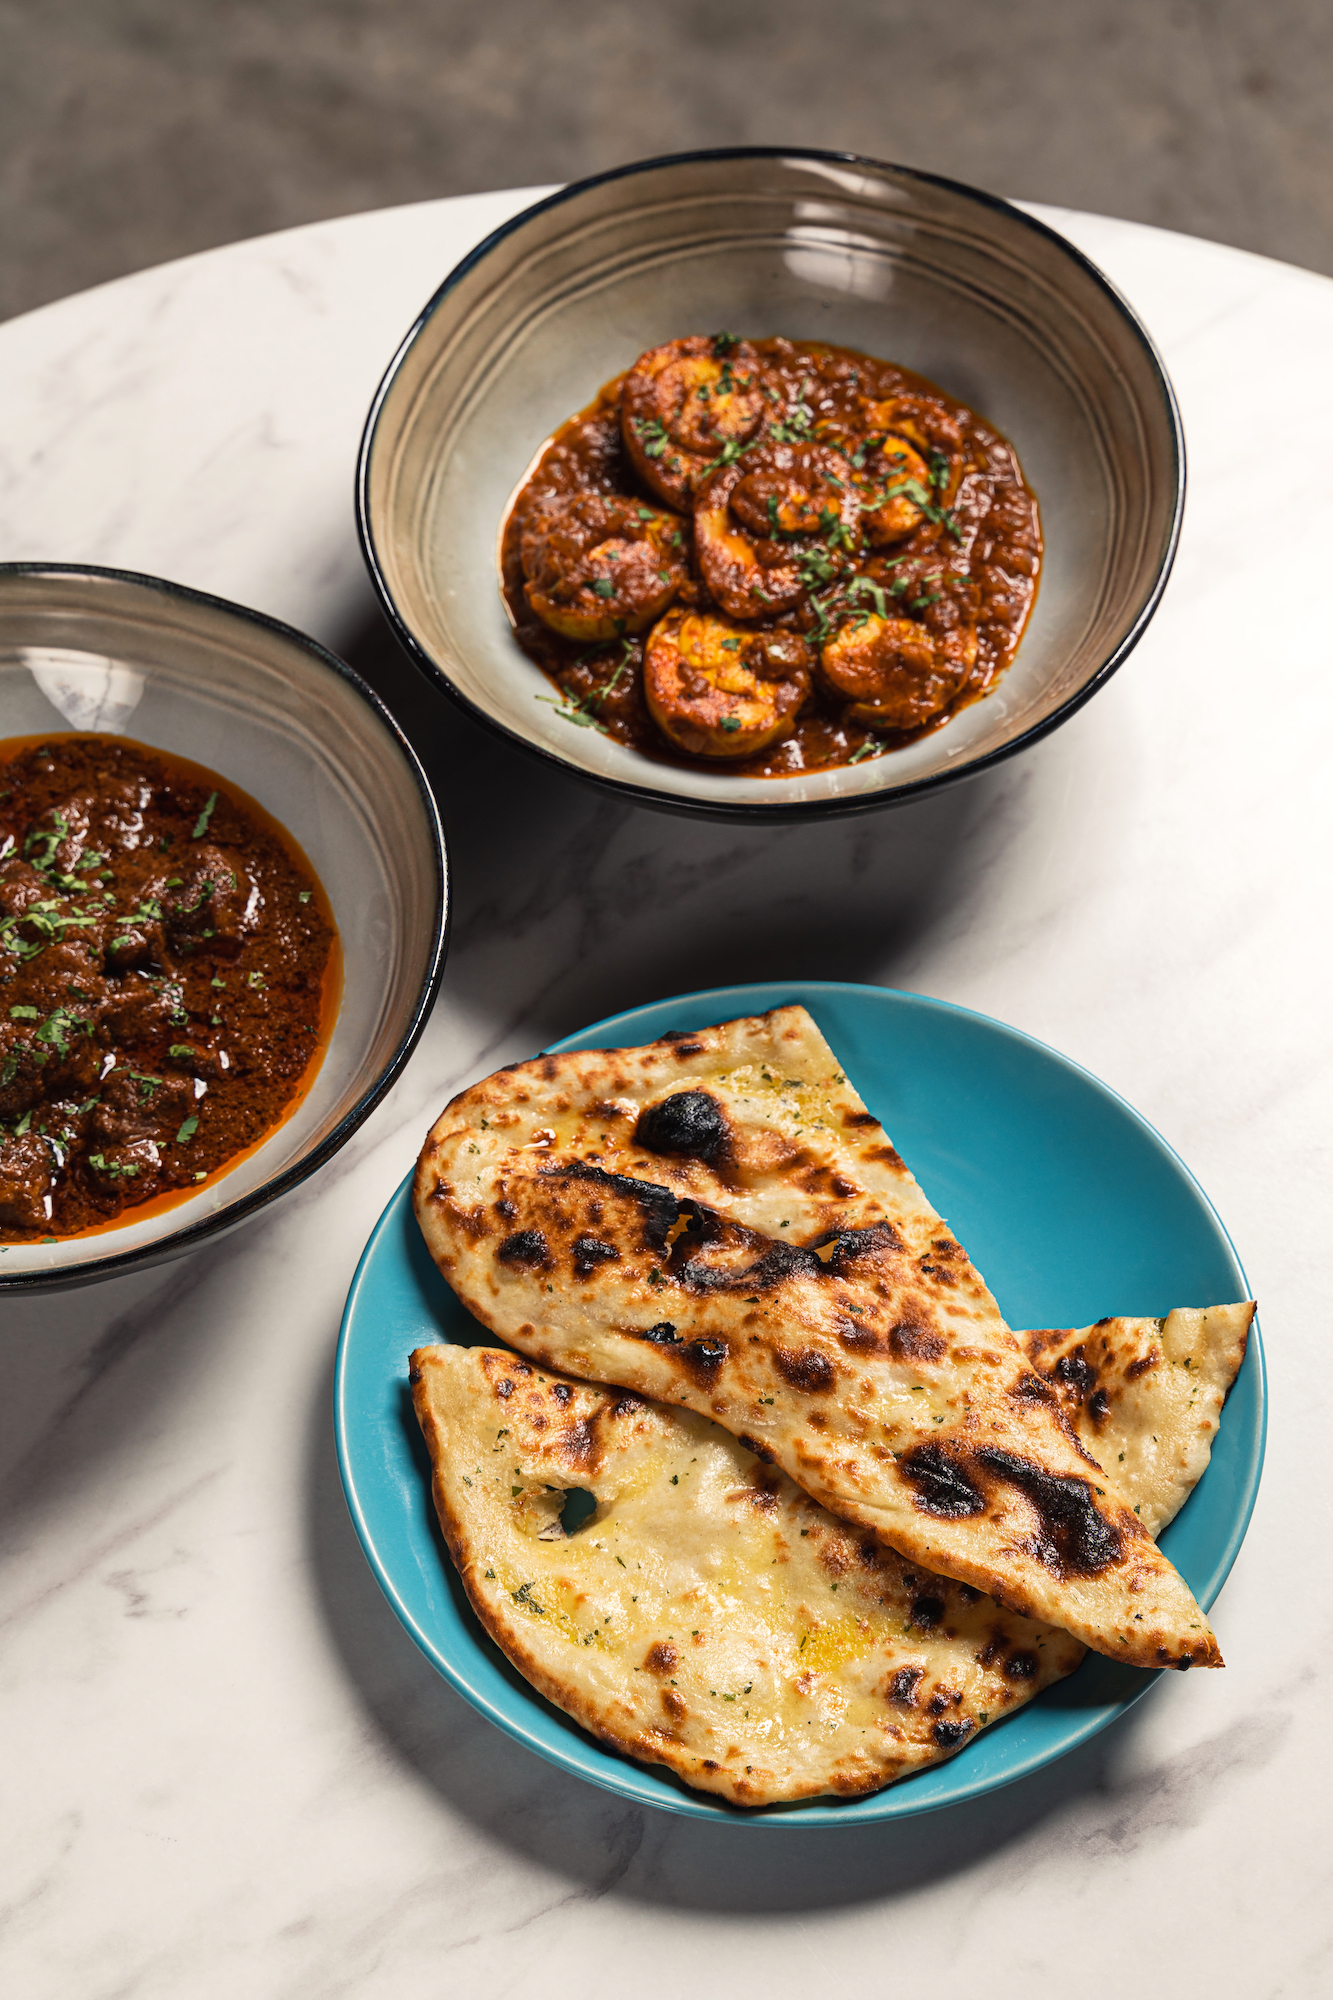 Dhaba-style egg curry, butter naan, and rogan gosht